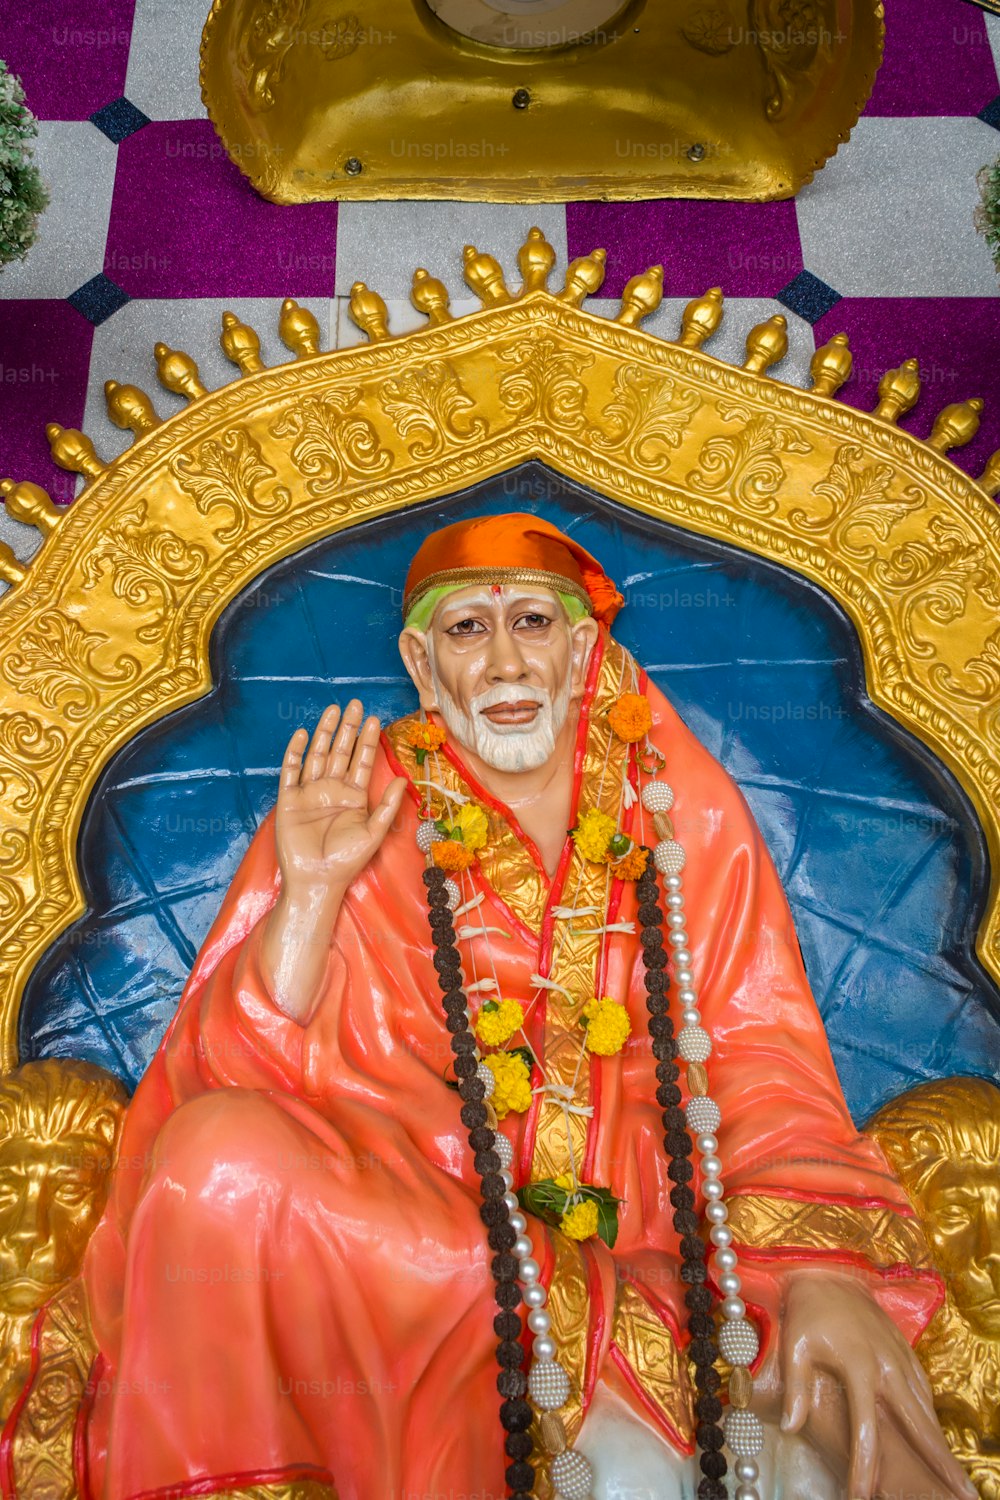 Top 999+ saibaba images download – Amazing Collection saibaba images download Full 4K